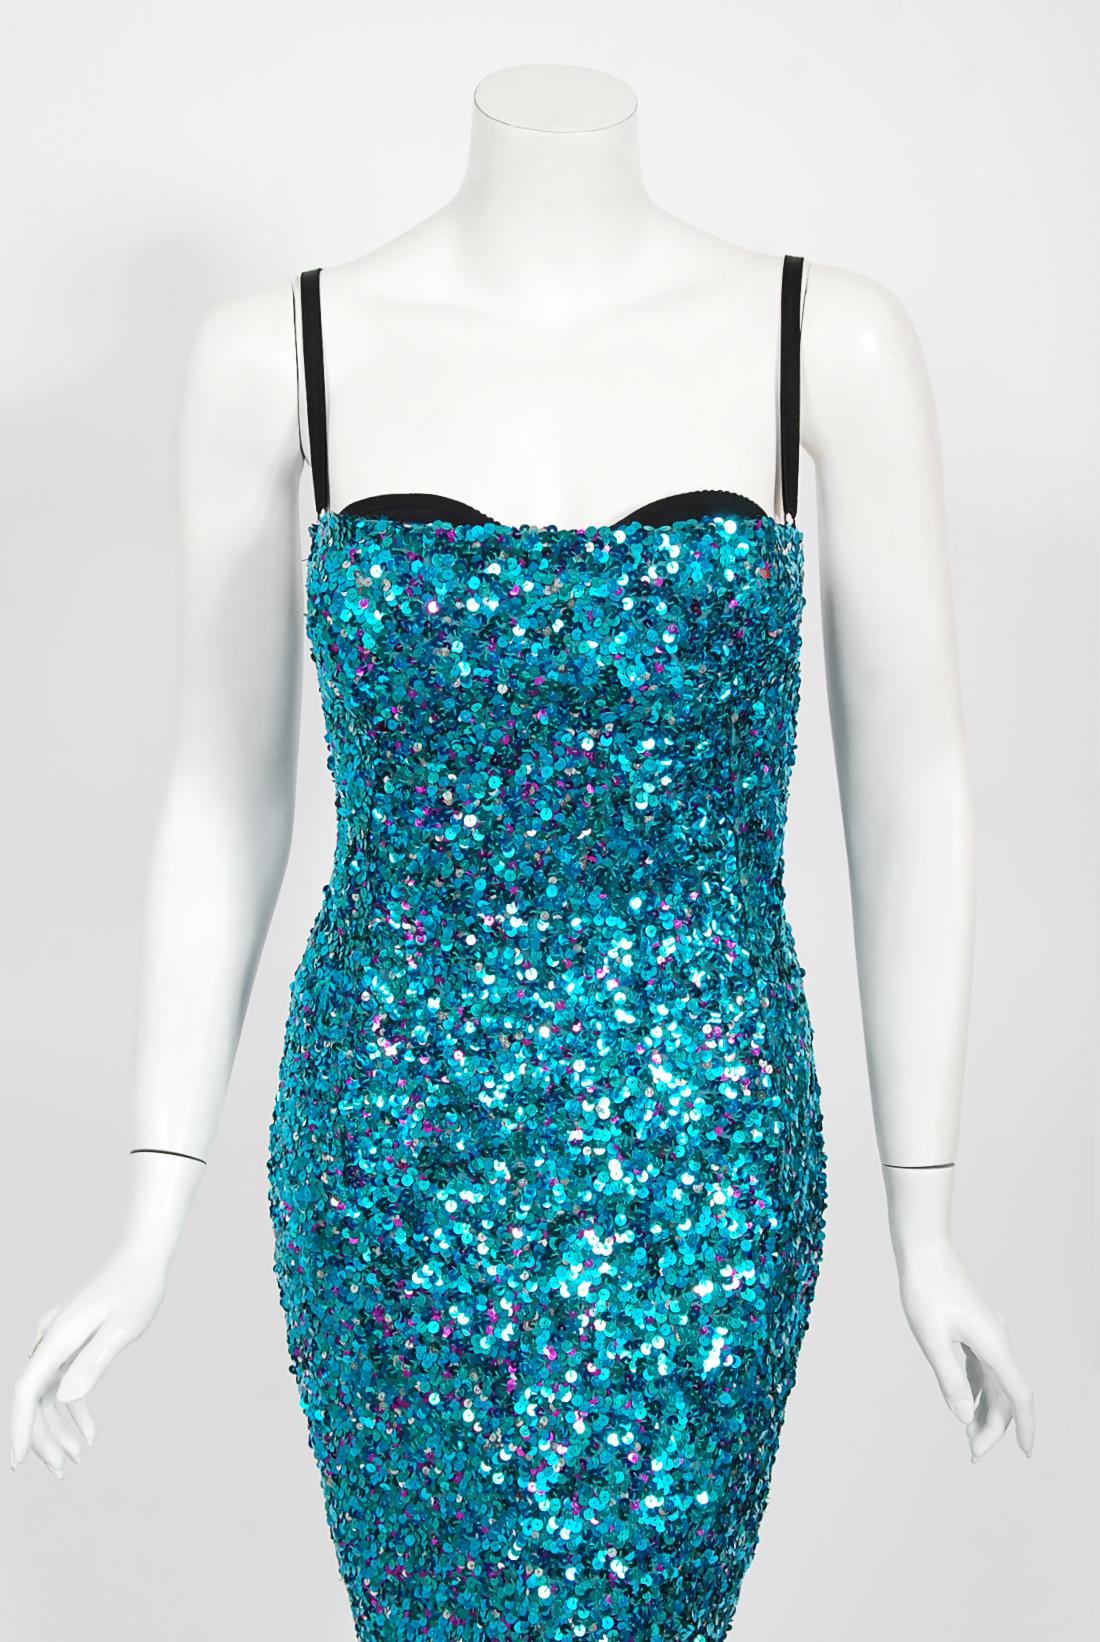 An ultra seductive and totally iconic Dolce & Gabbana fully-sequin blue stretch silk hourglass dress dating back to their 2000 fall/winter collection. As shown, this epic dress was Elle Wood's choice pick in 